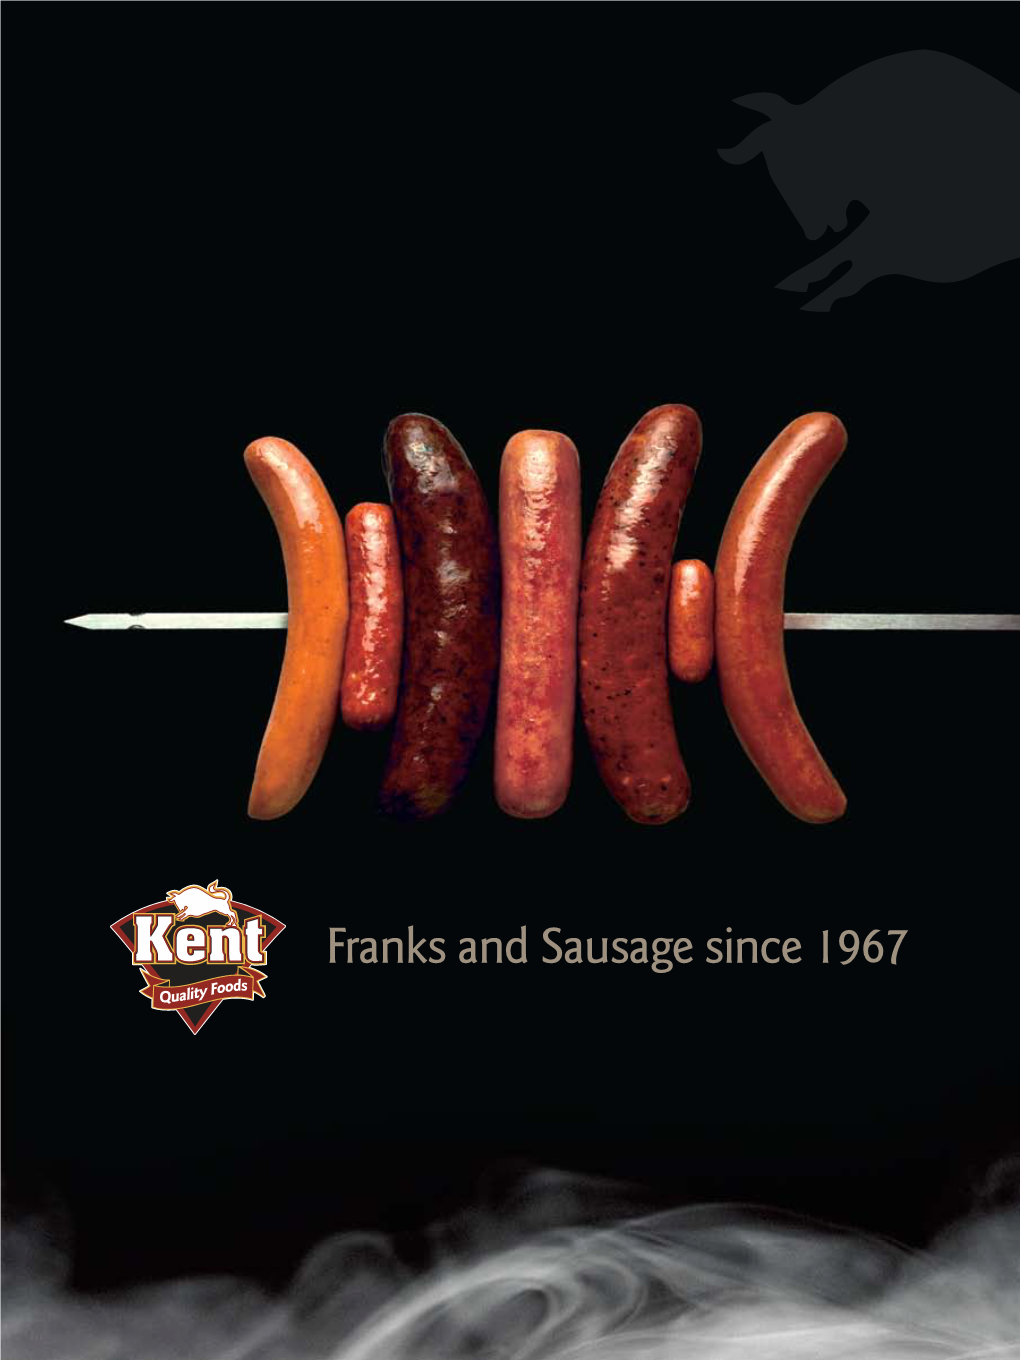 Franks and Sausage Since 1967 2 Kent Quality Foods Since 1967